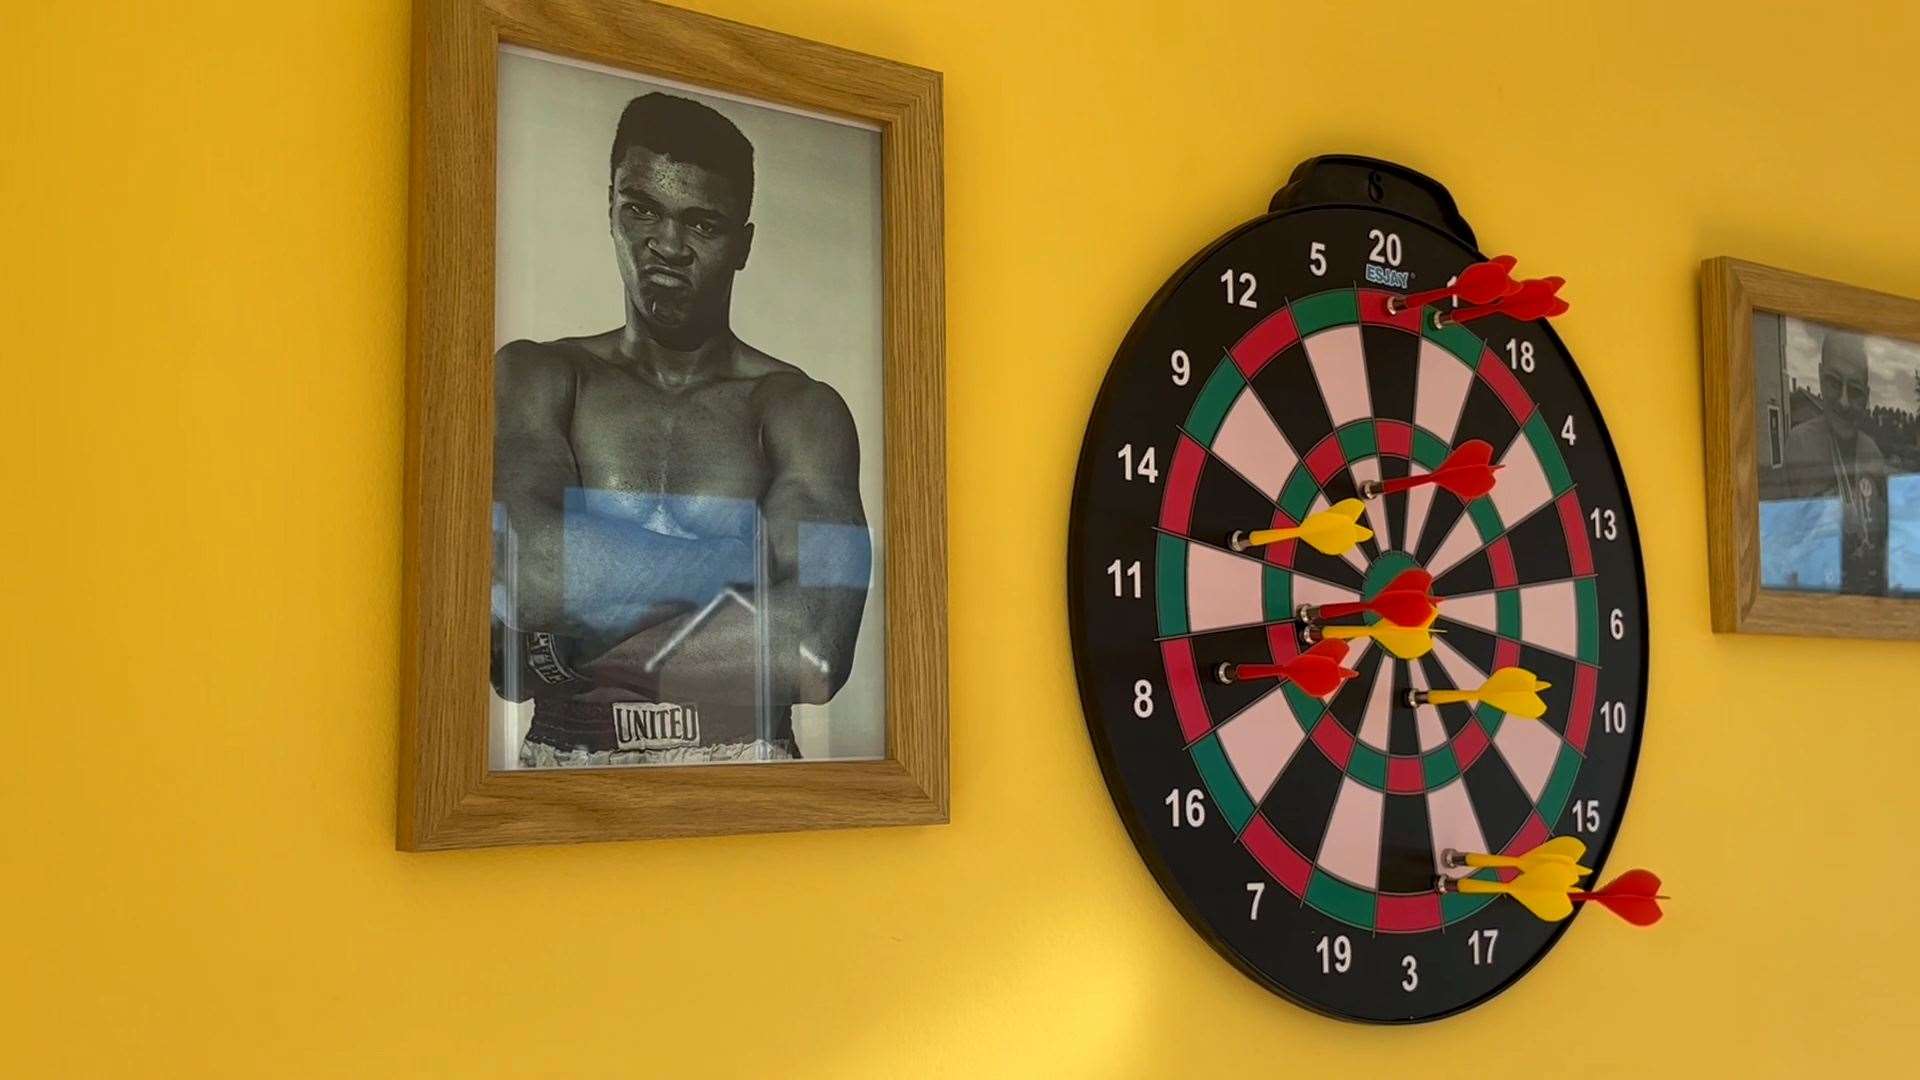 A sports area at the home where residents can engage in games such as darts